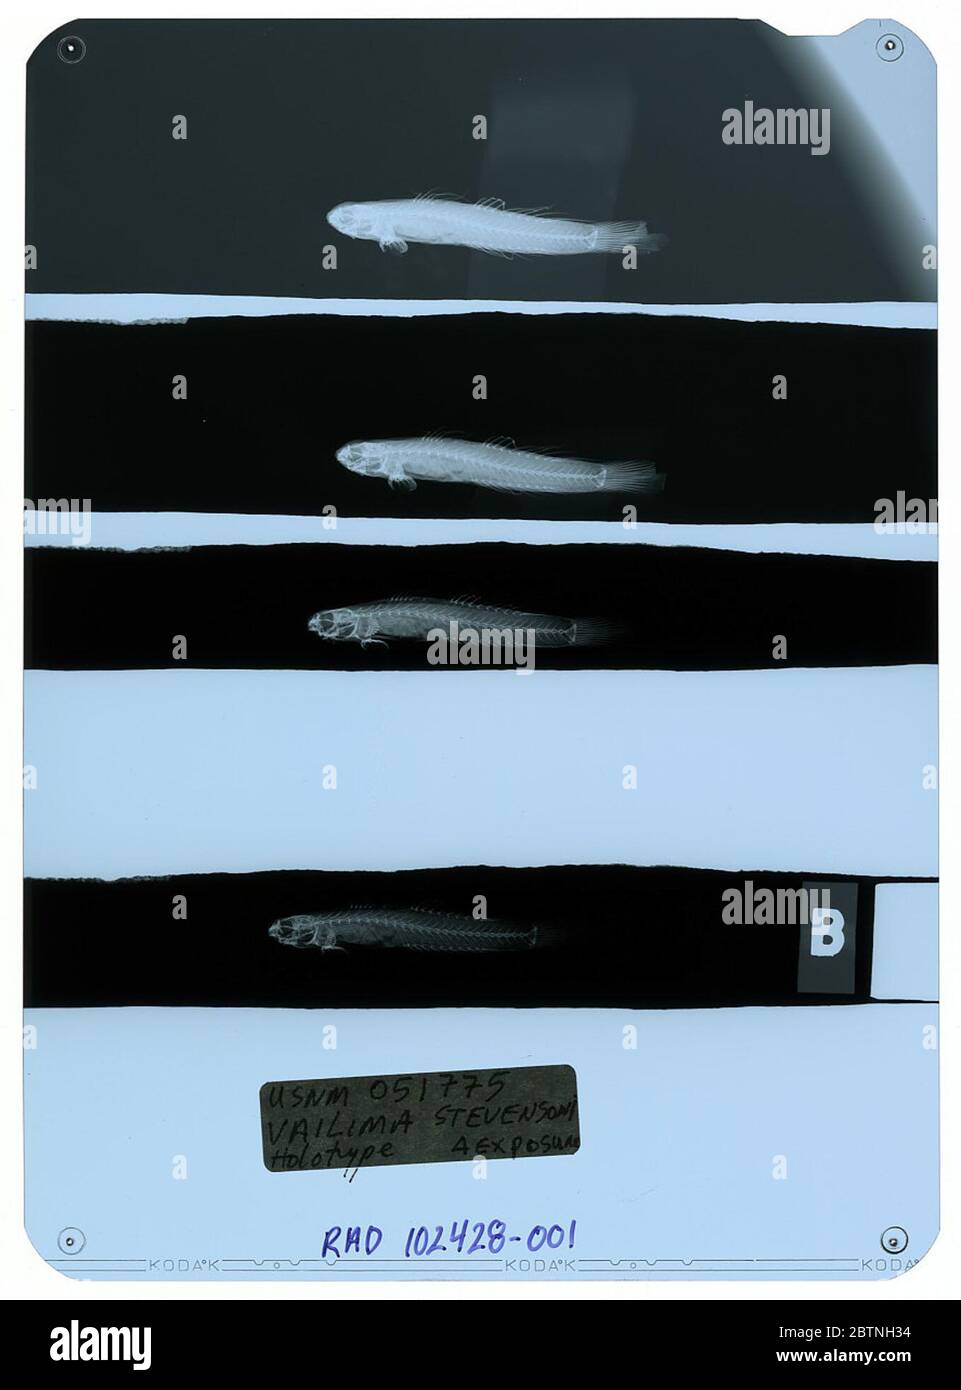 Vailima stevensoni Jordan Seale. Radiograph is of a holotype; The Smithsonian NMNH Division of Fishes uses the convention of maintaining the original species name for type specimens designated at the time of description. The currently accepted name for this species is Stiphodon elegans.24 Oct 20181 Stock Photo